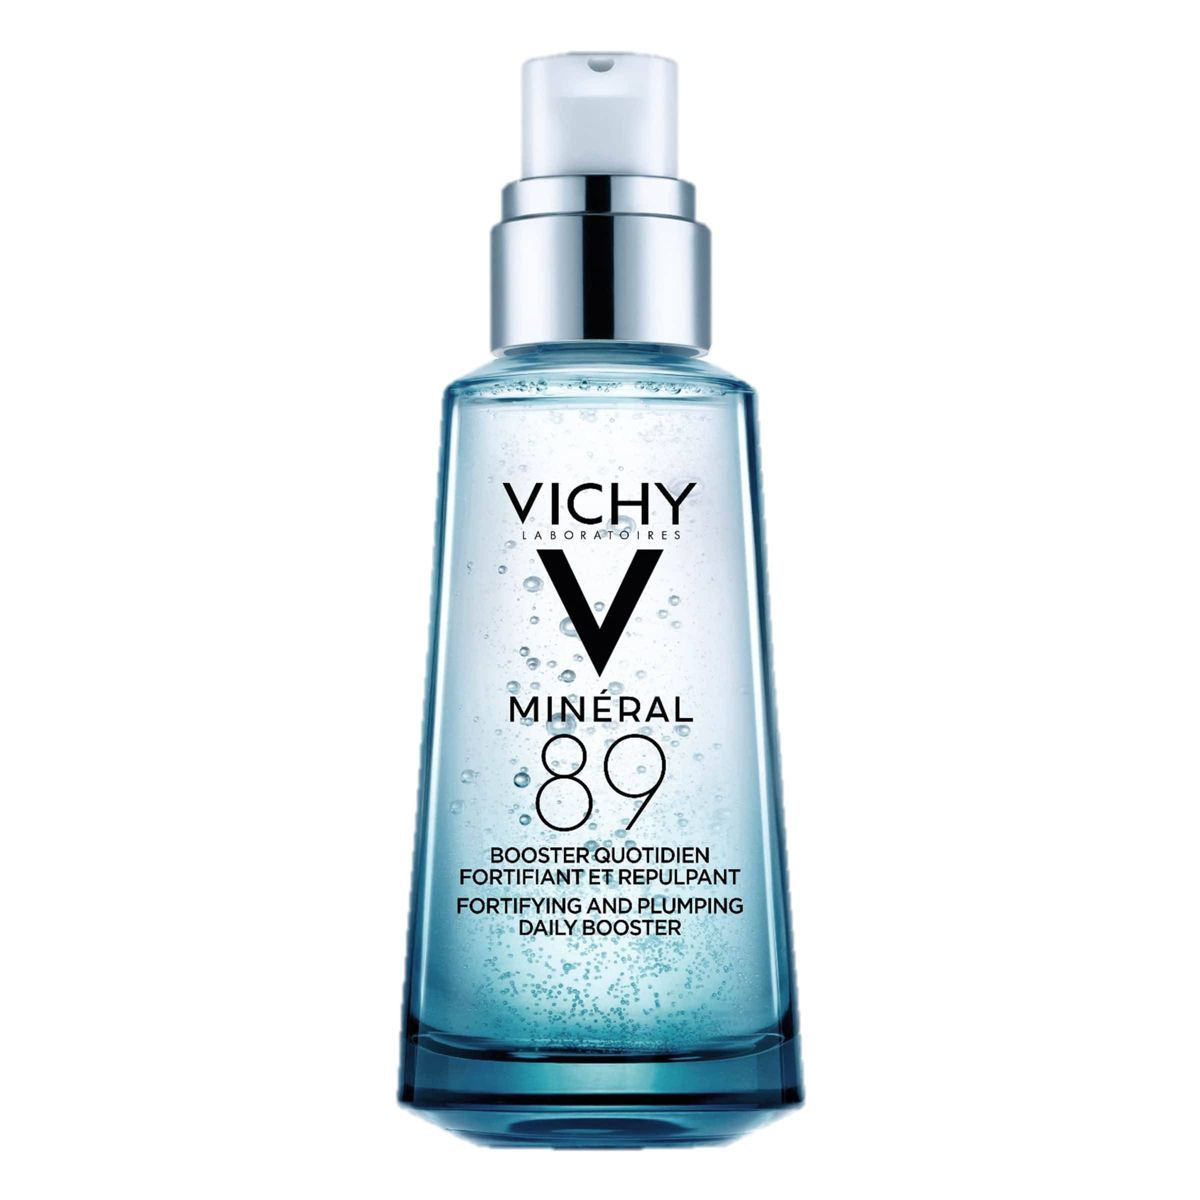 Vichy Mineral 89 Hydrating & Strengthening Daily Skin Booster, Face Serum with Hyaluronic Acid - ... | Target